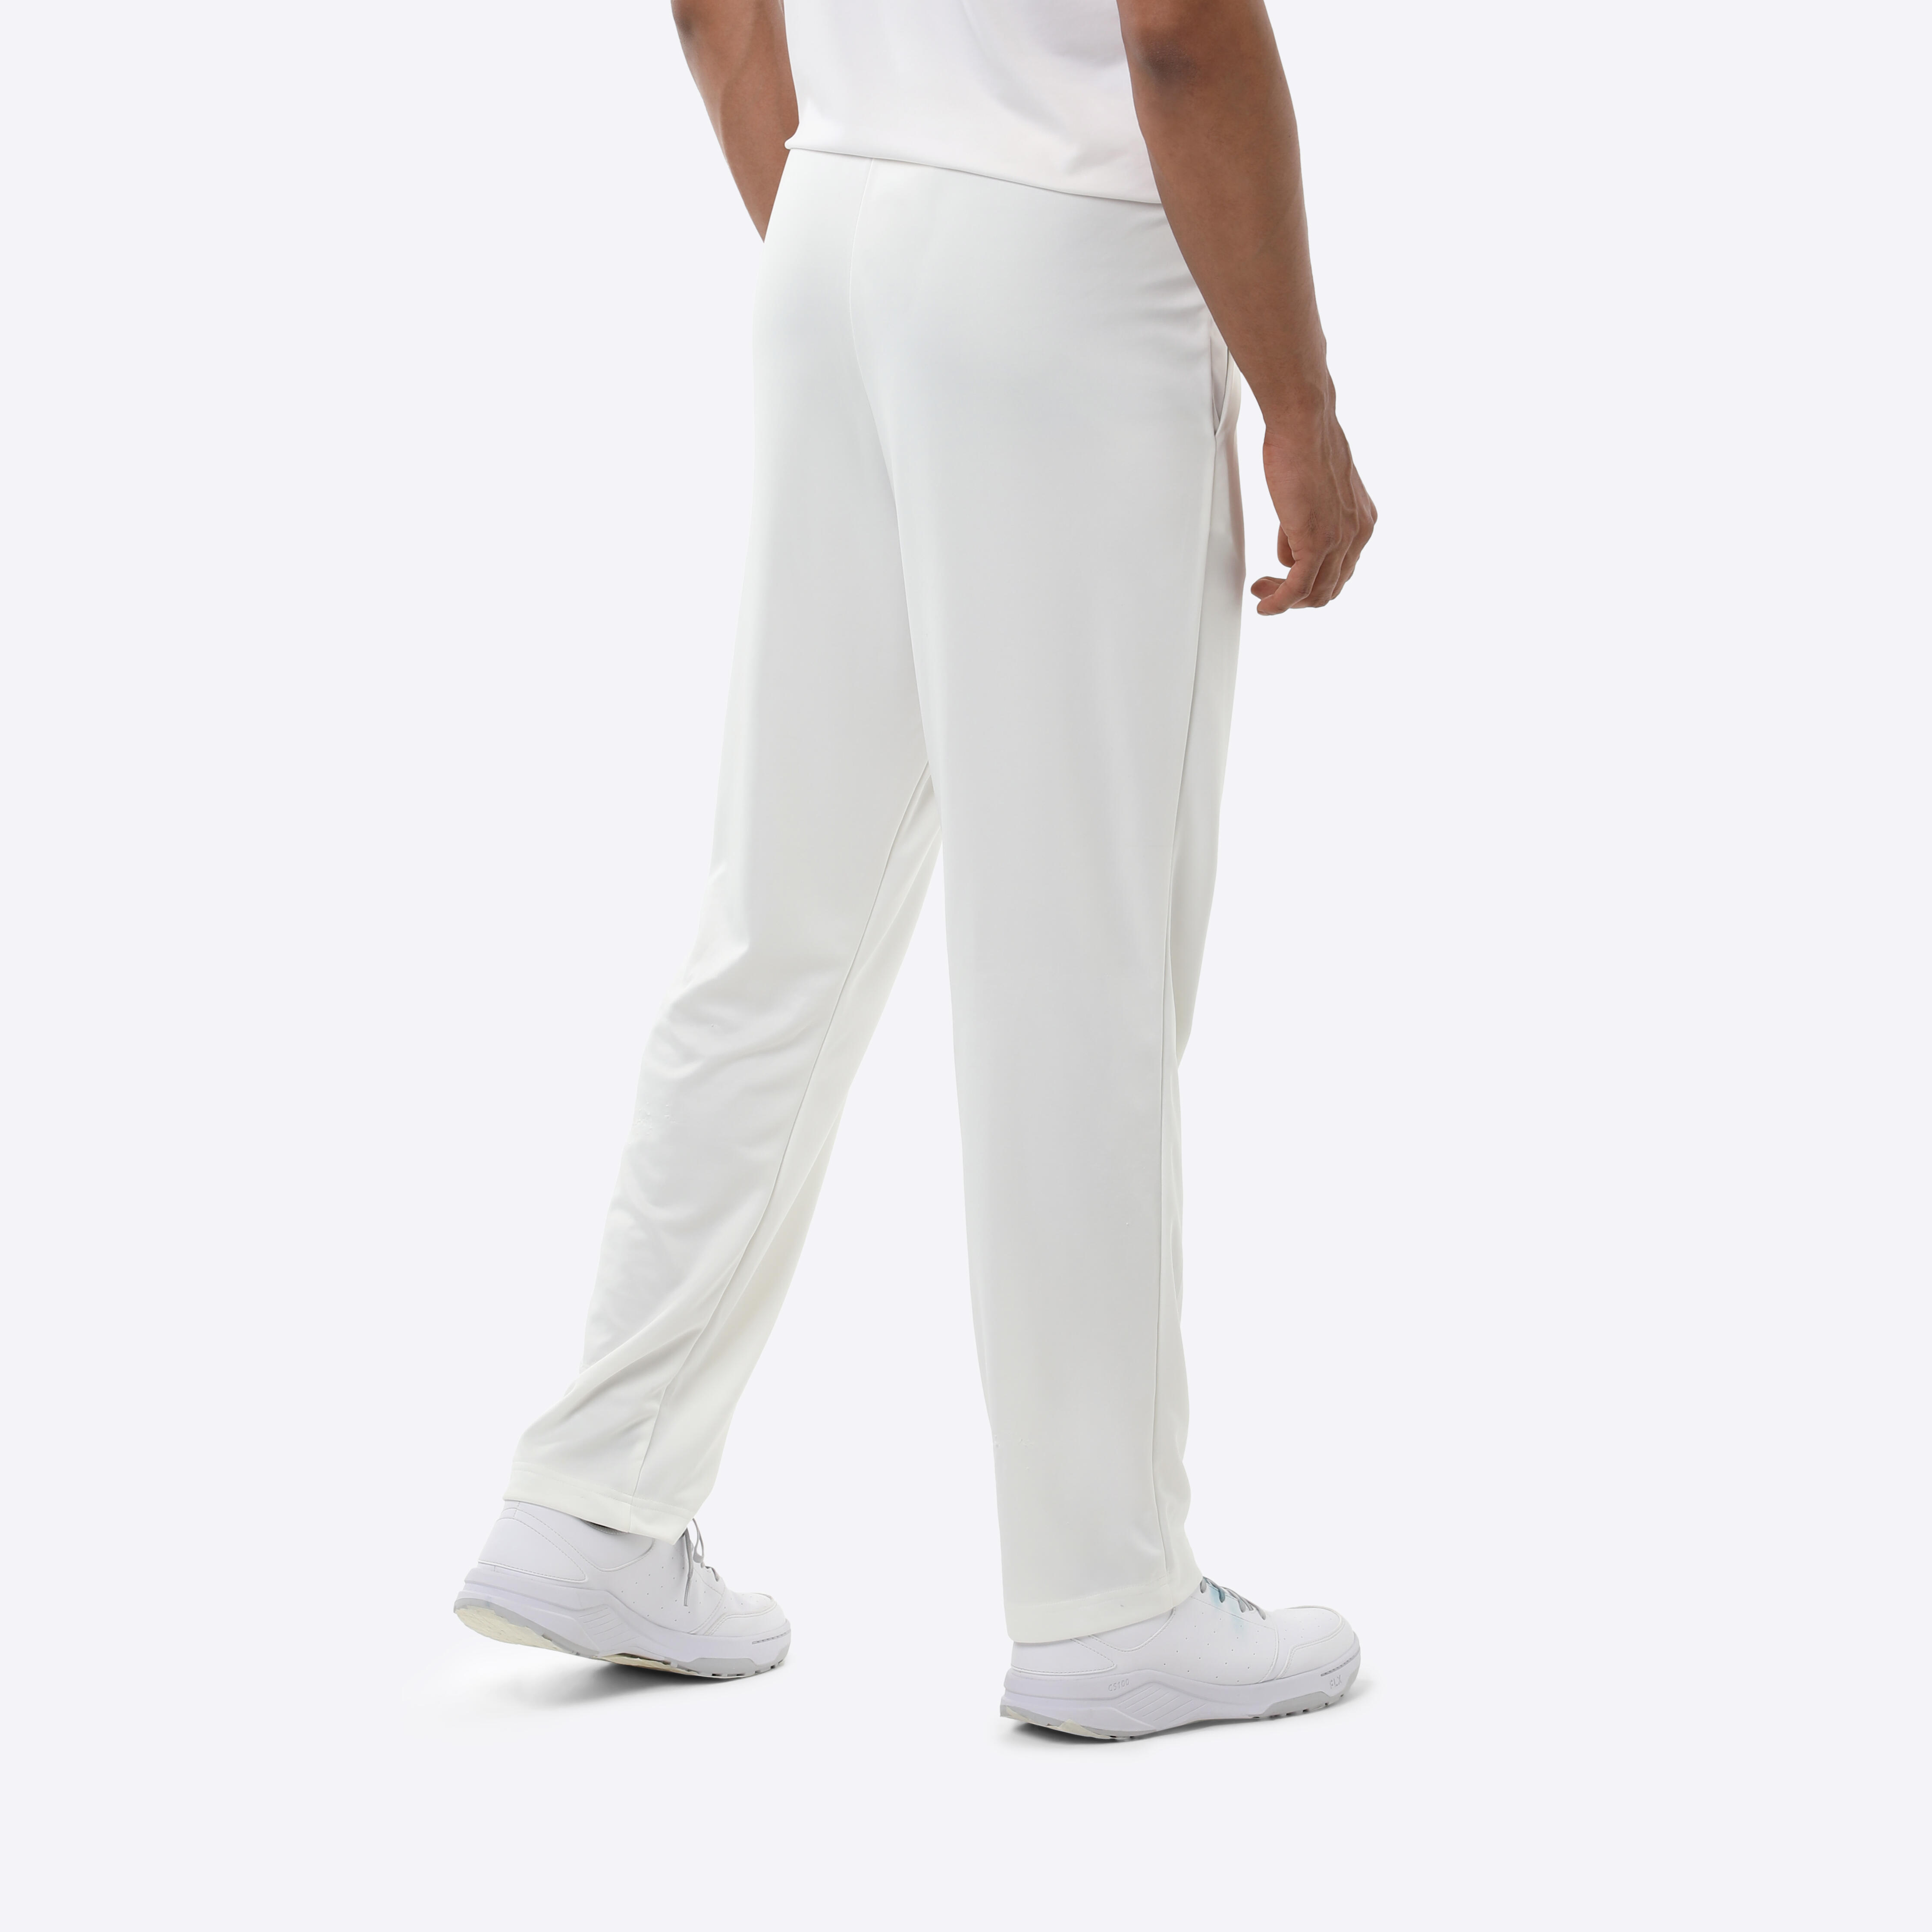 CW Mens White Cricket Pair Half Sleeve Cricket Shirt with Full Length Cricket  Trousers Pant Comfortable Fit Performance Pair in Cotton Drift 28   Amazonin Clothing  Accessories